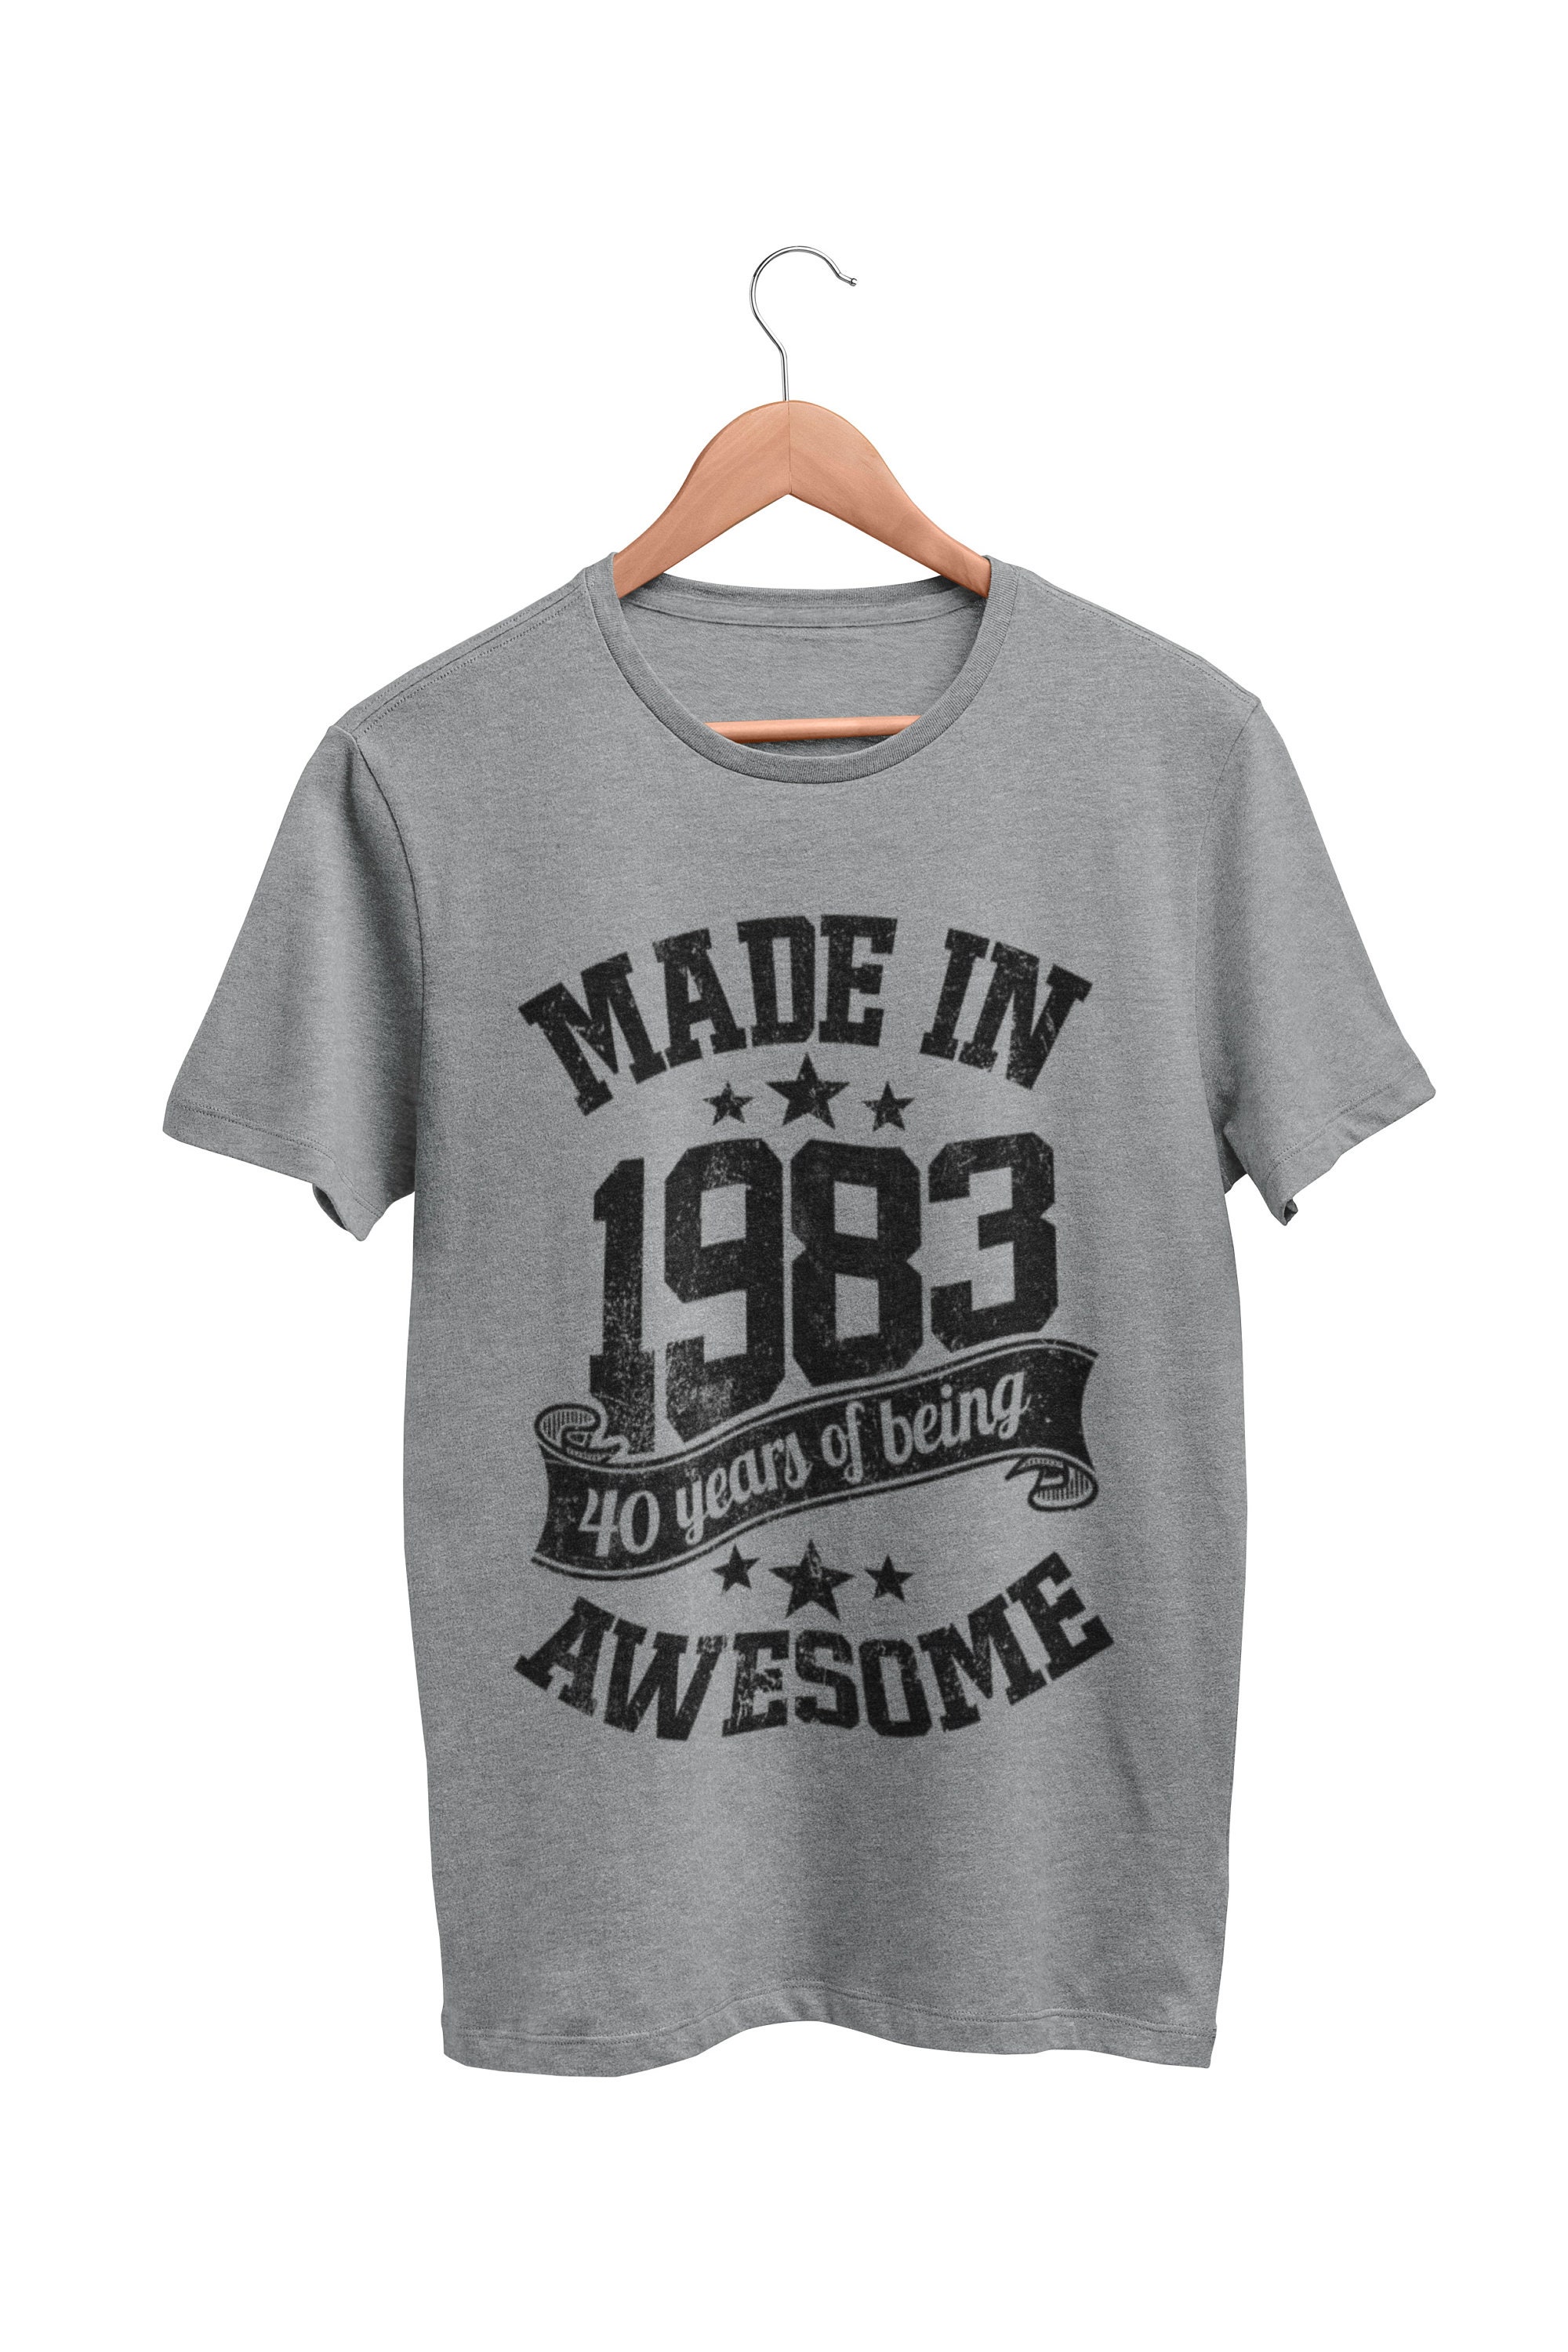 Discover Funny 40th Birthday T Shirt 2023 Made In 1983 40 Years Of Being T-Shirt